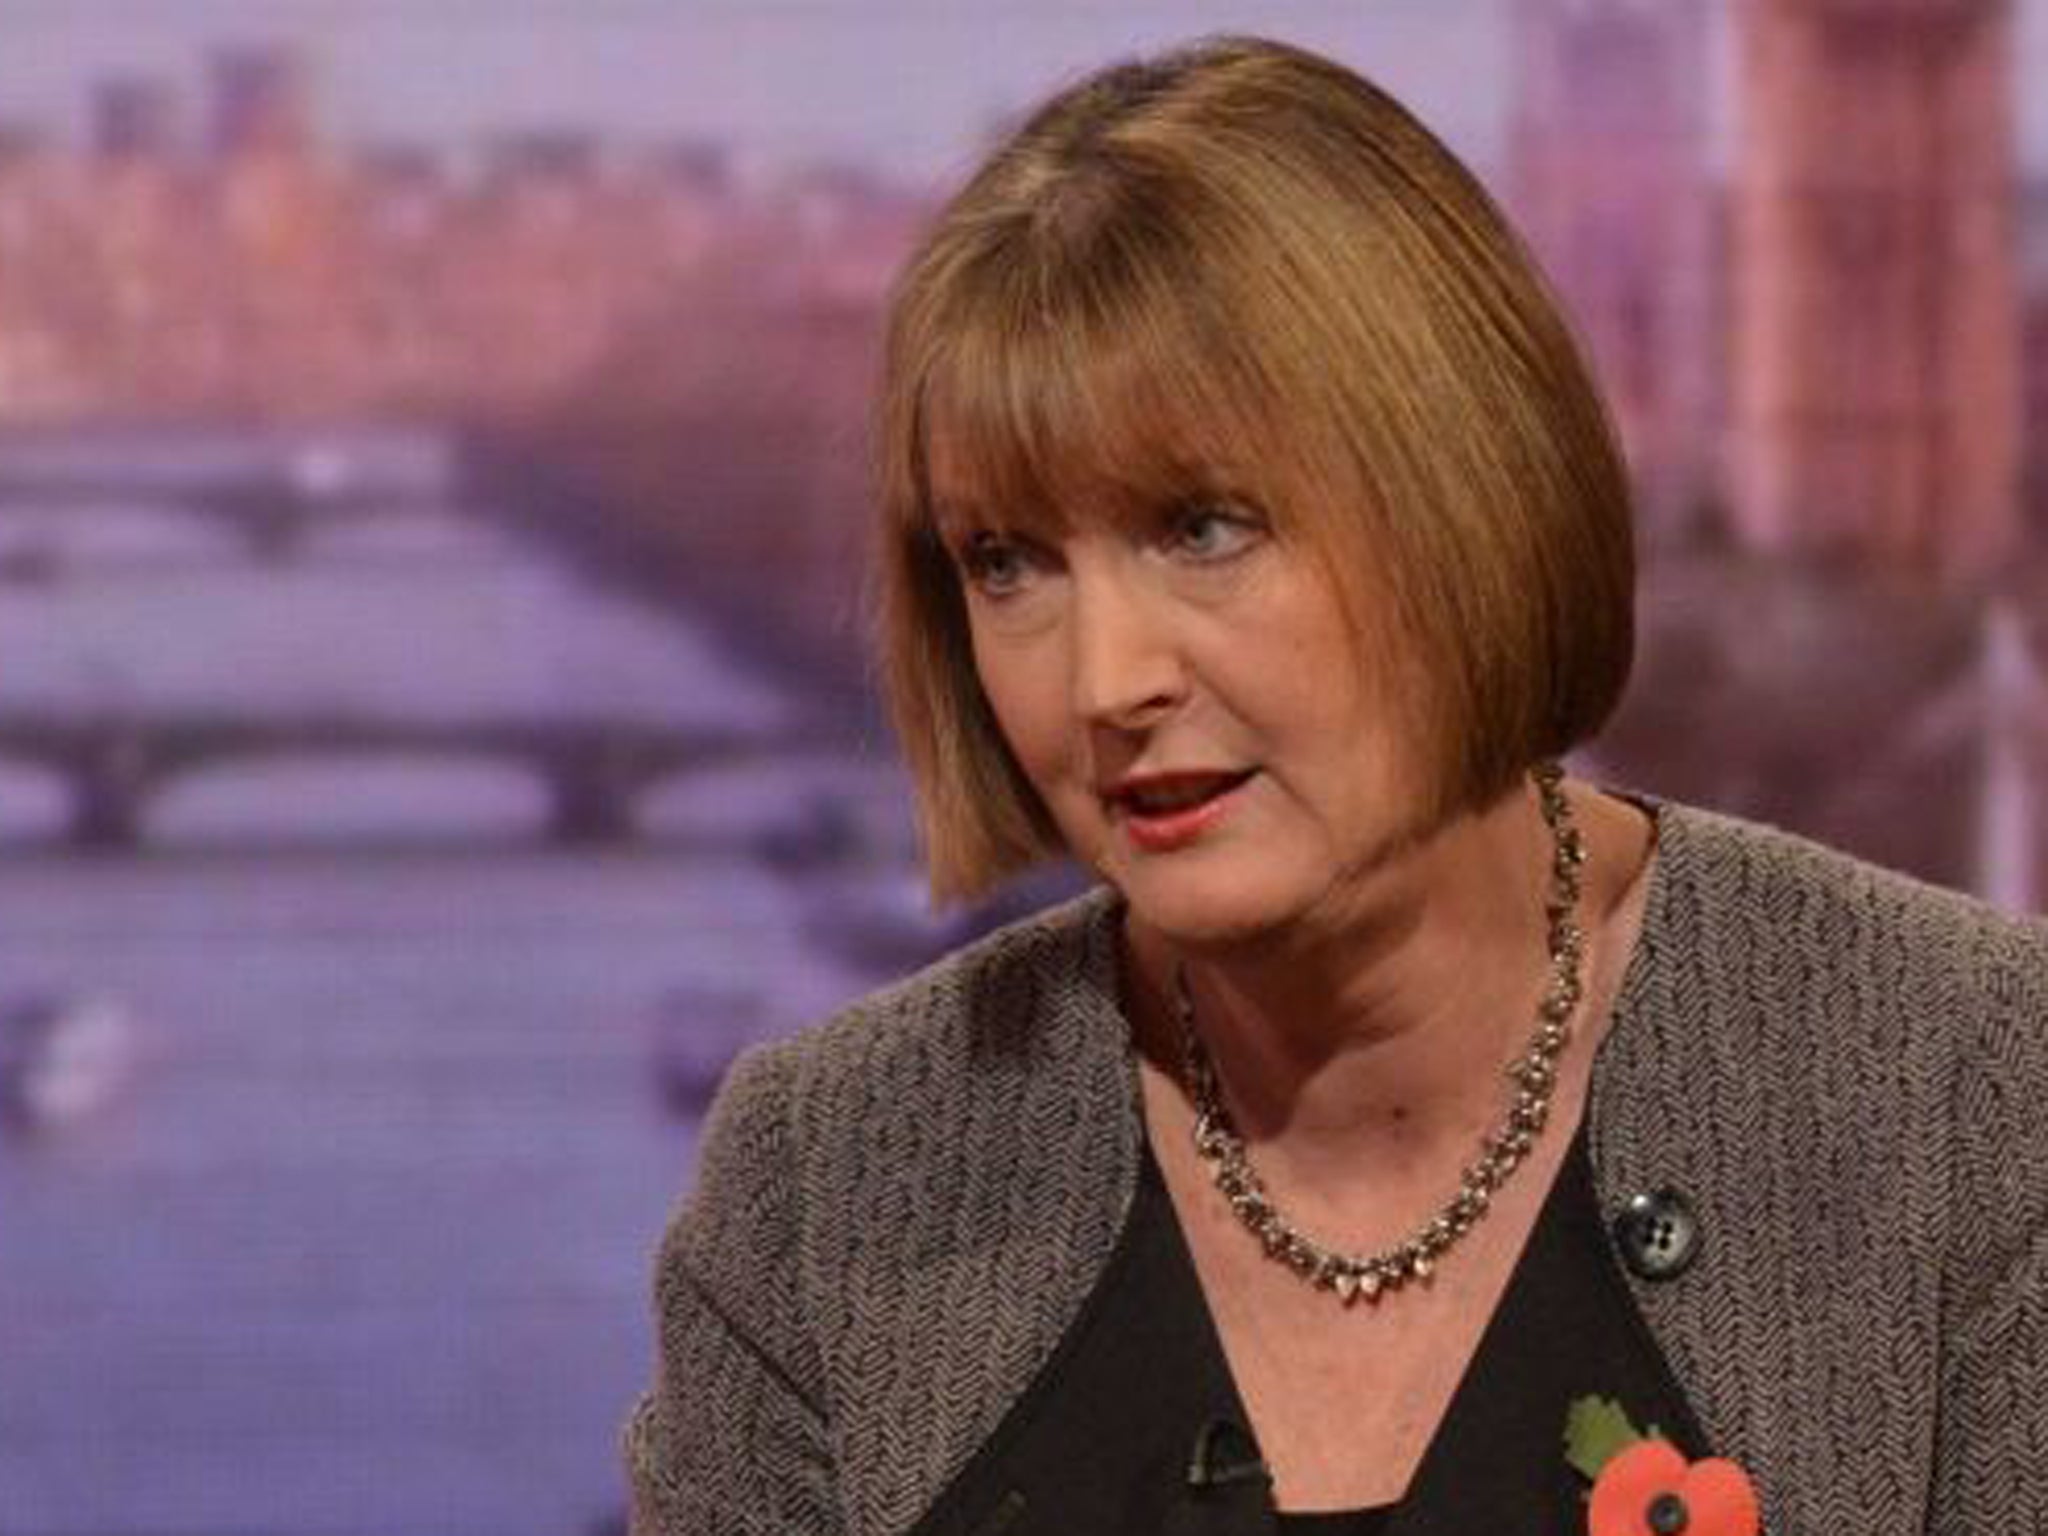 Harriet Harman's report into Camberwell and Peckham shows that 76 per cent of her constituents affected by the spare room subsidy are unemployed and 83 per cent are single parents